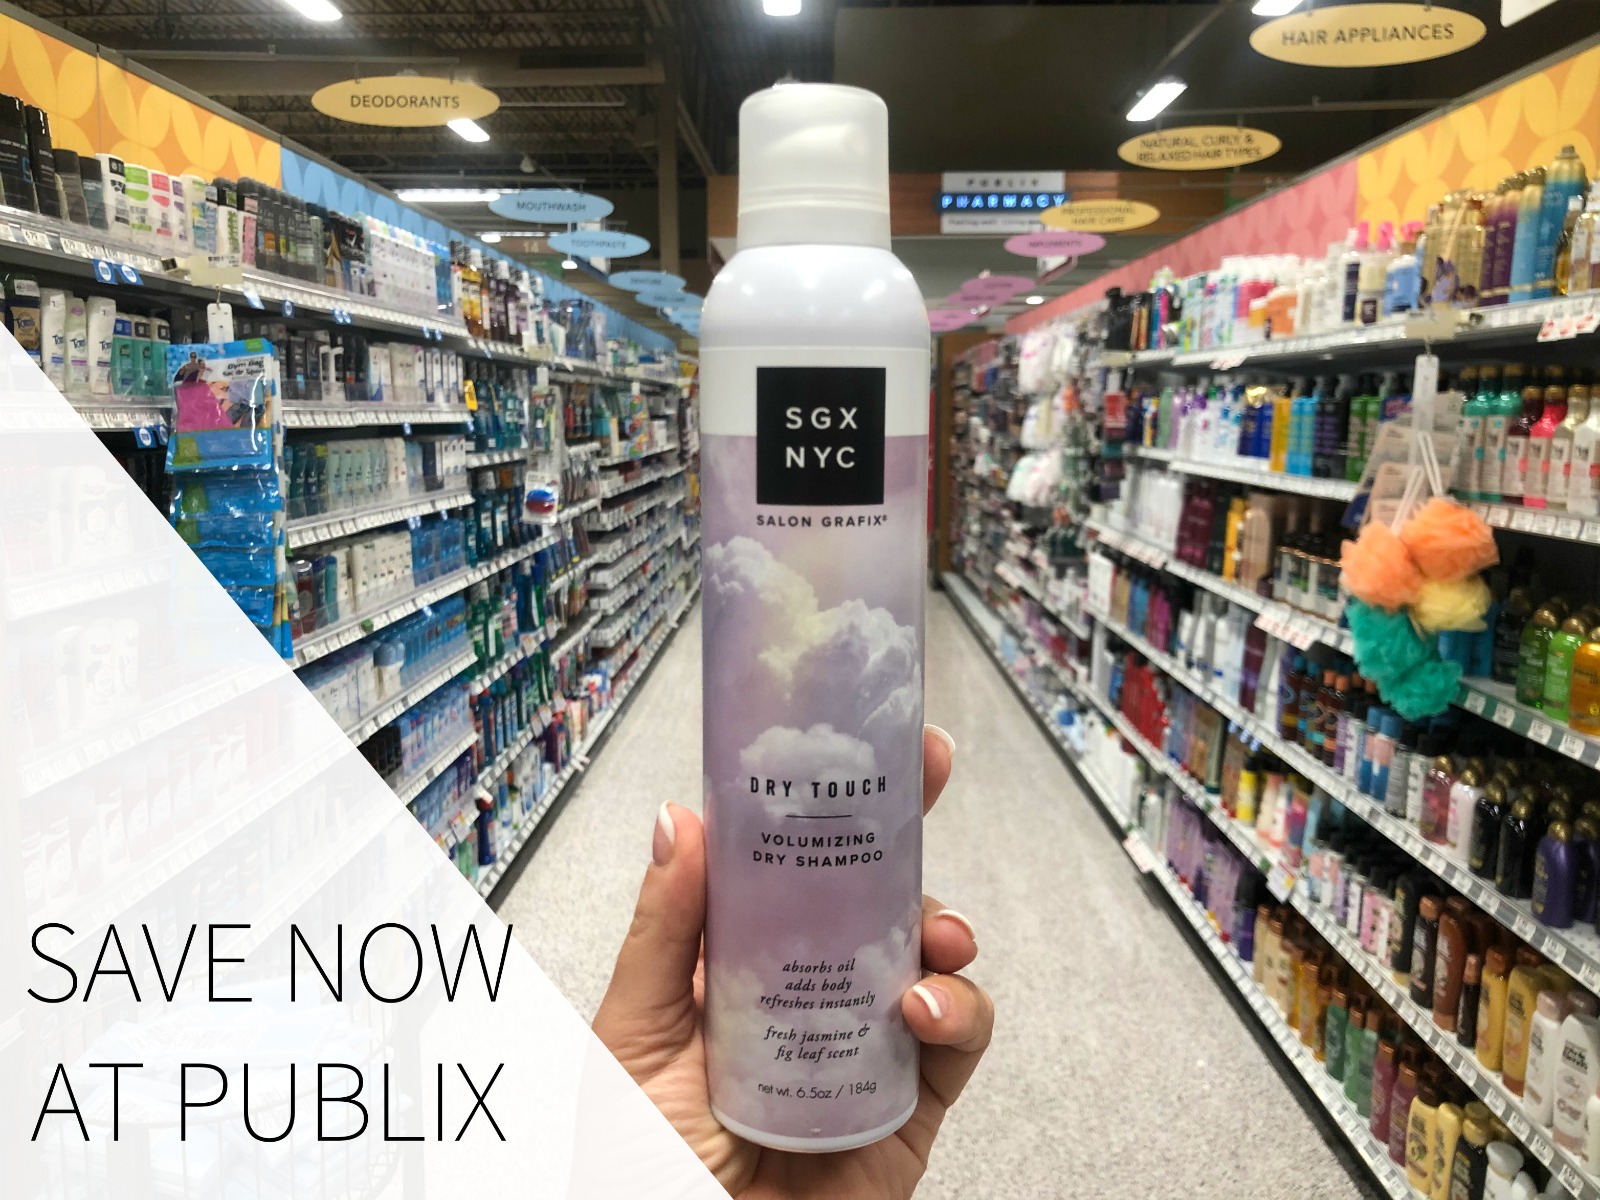 Save $2 On All Your Favorite SGX NYC Haircare Items At Publix! on I Heart Publix 1